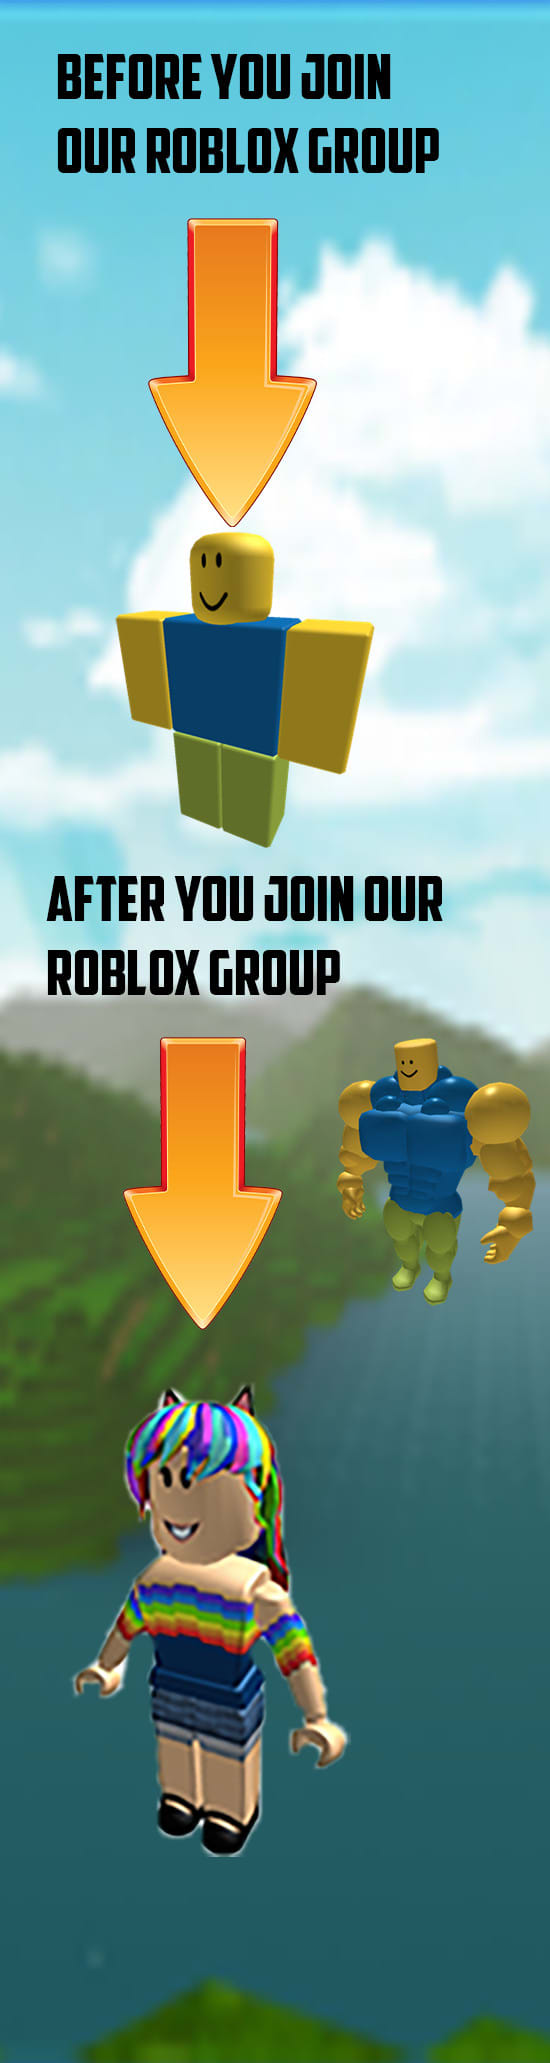 Make A Roblox Advert For You By Spaceman247pug4